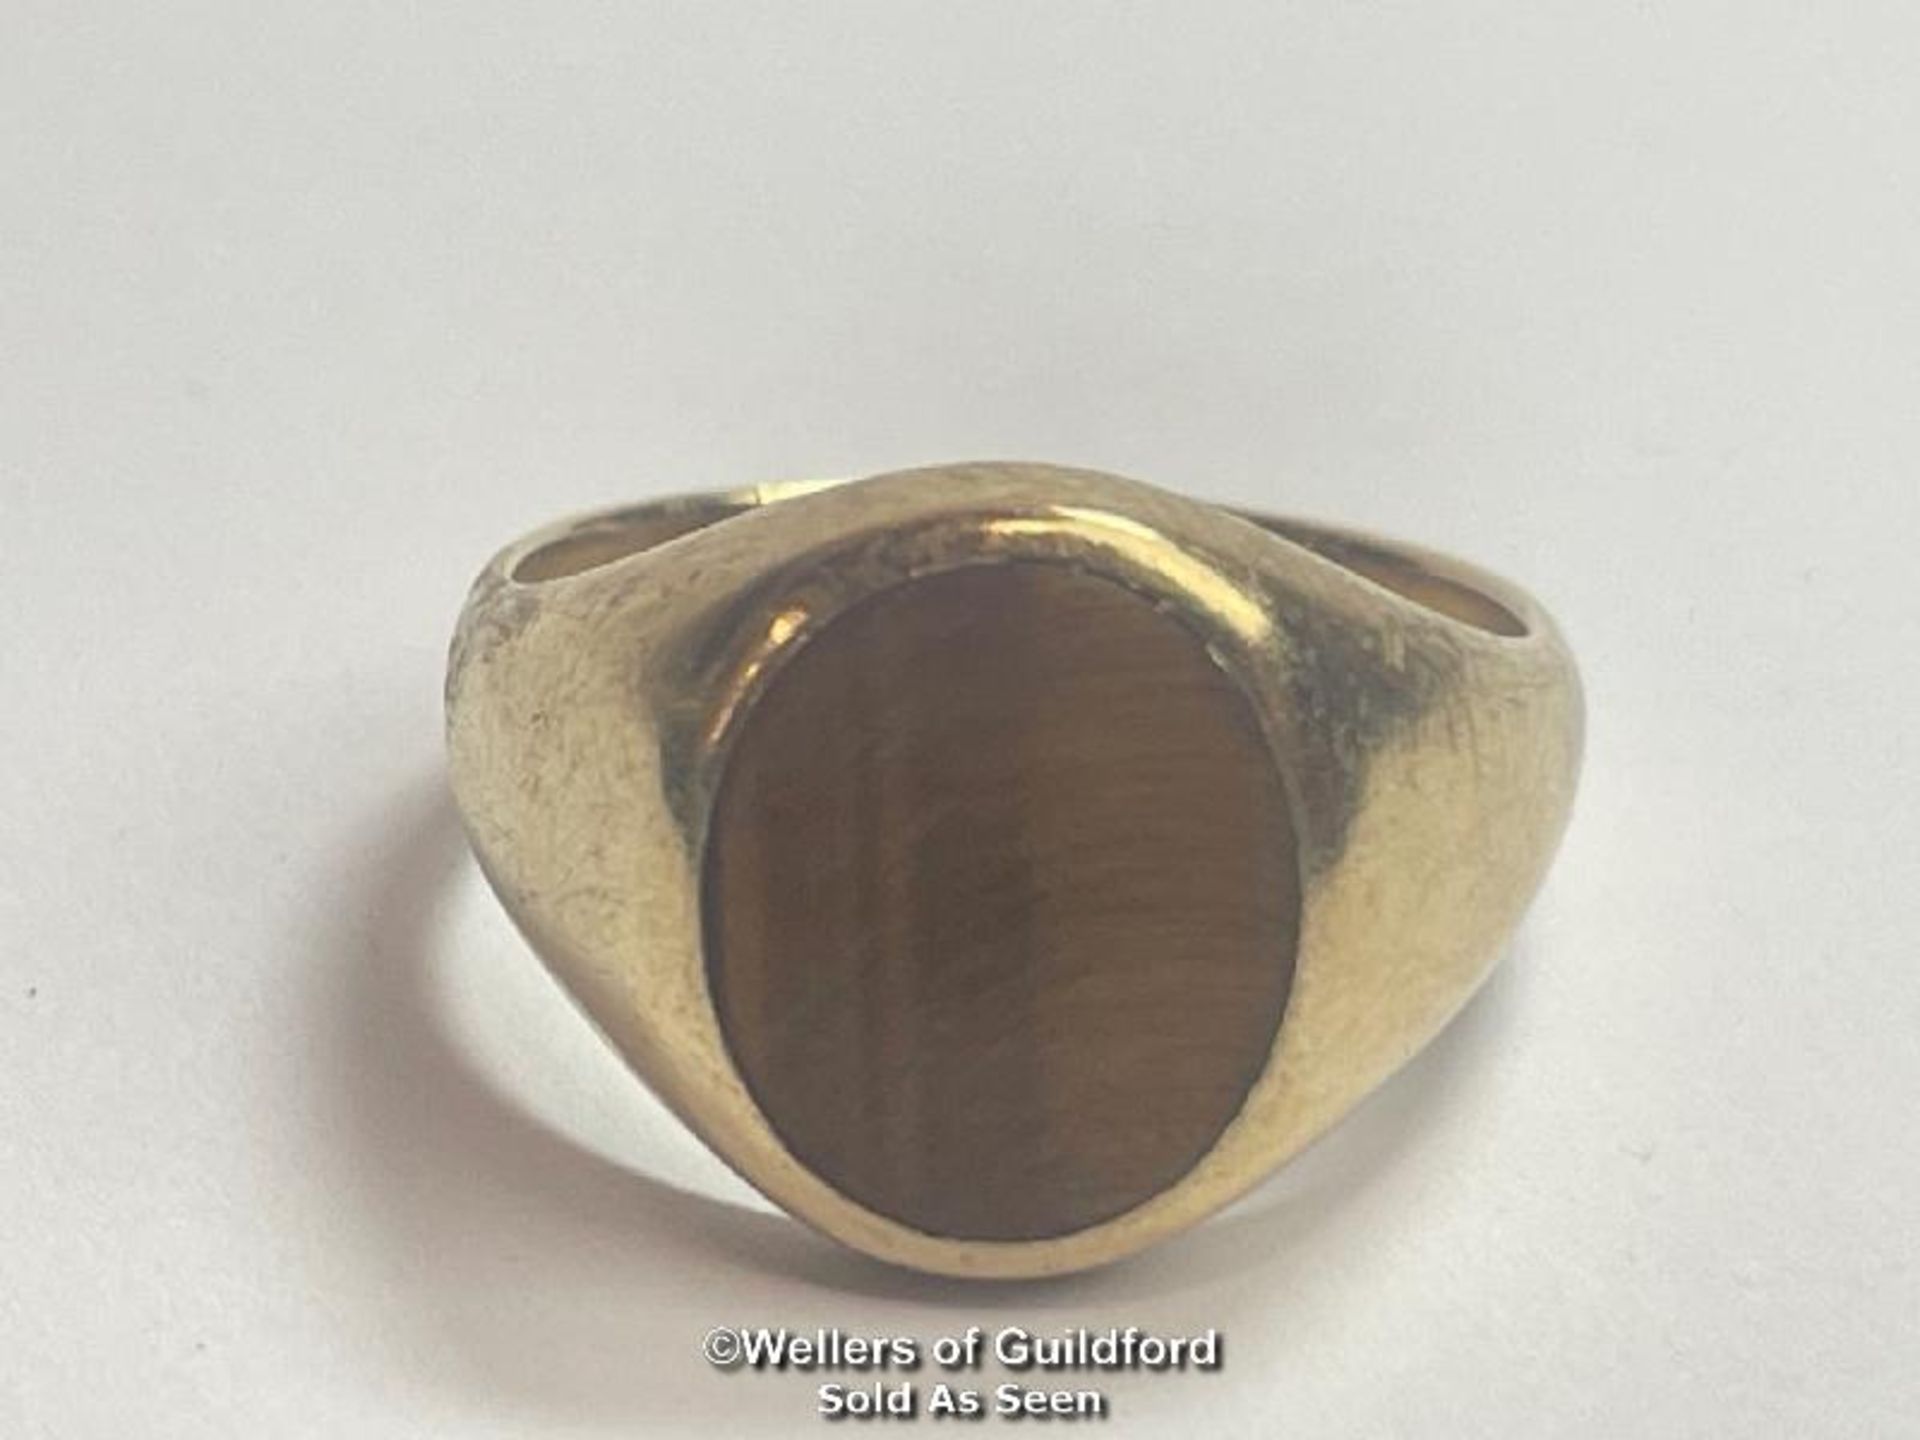 A Tiger's eye signet ring in 9ct gold, hallmarked London 2004, ring size S, weight 7.81g with - Image 3 of 8